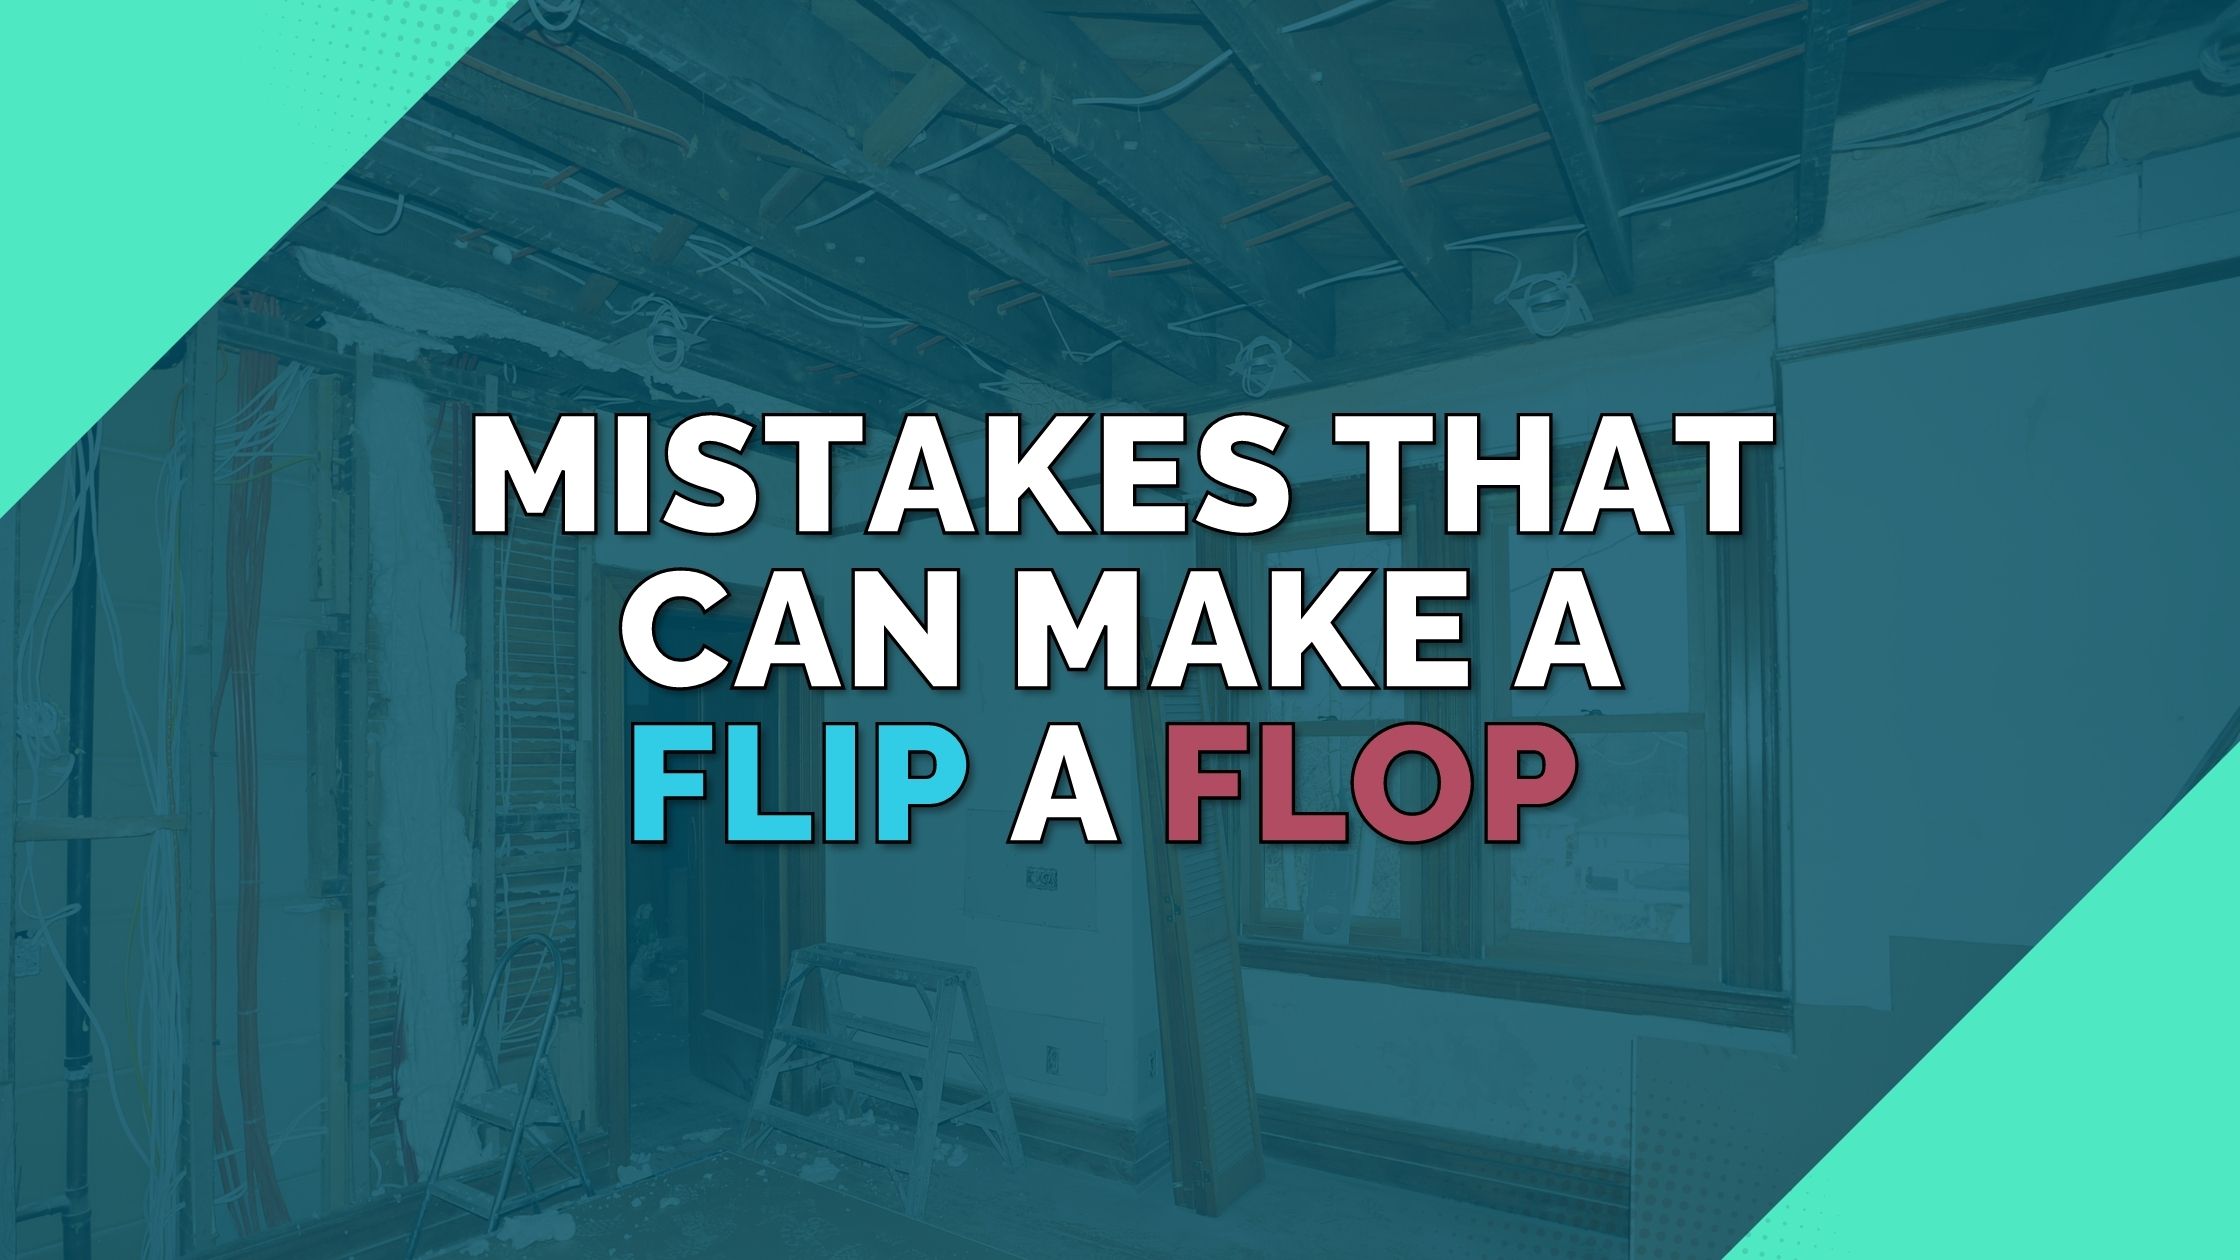 6 Mistakes That Can Make House Flipping a Flop